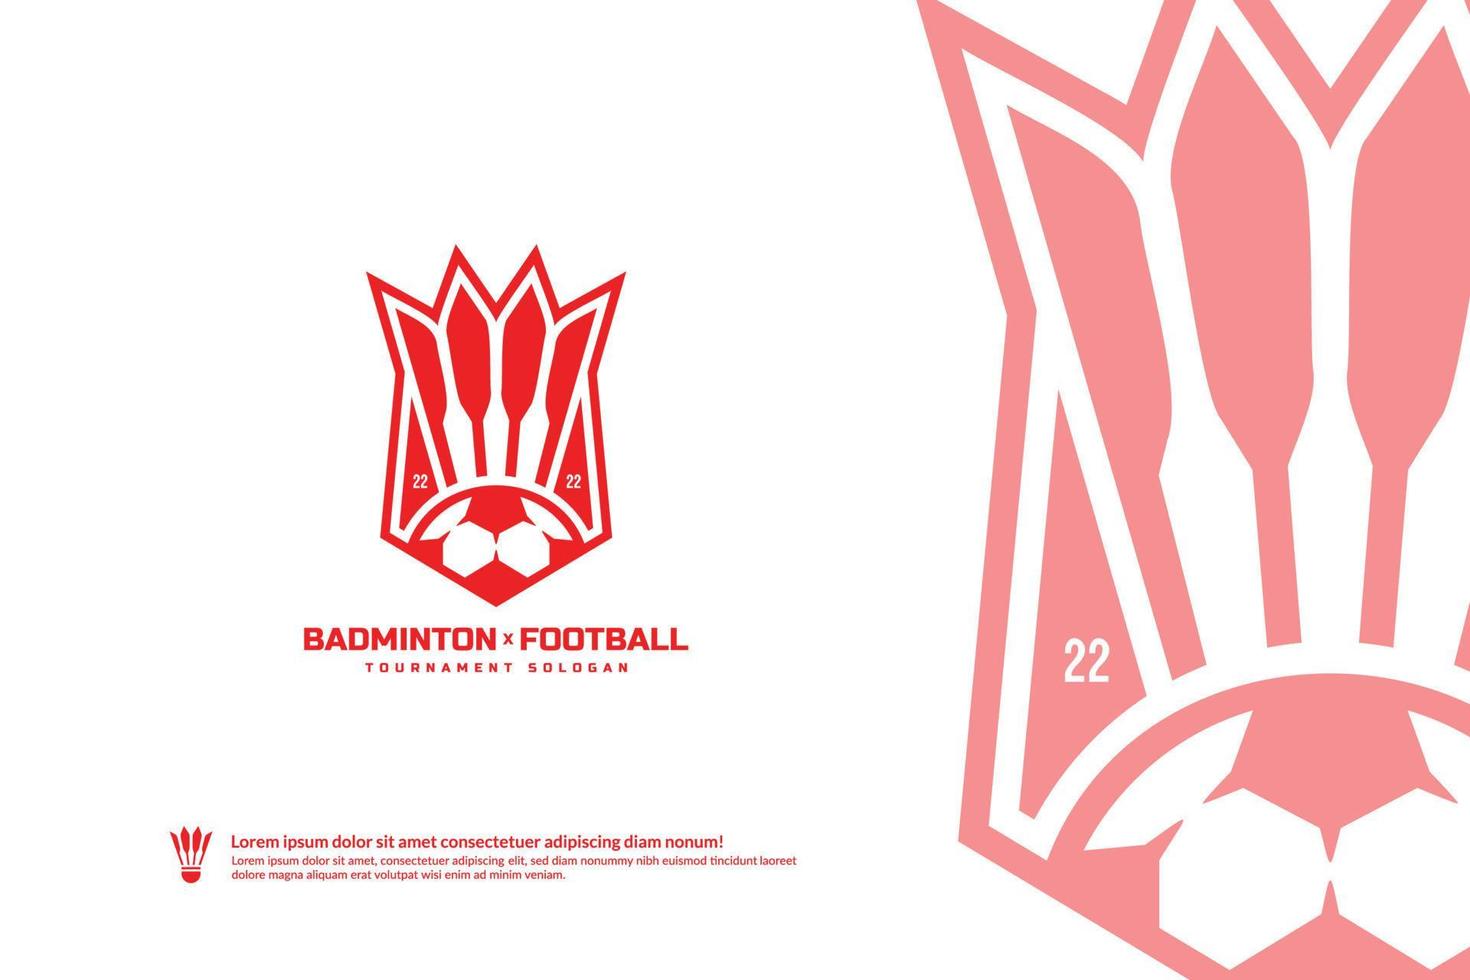 Badminton and football club logo, Sport tournaments logotype concept. Club team identity isolated on white Background, Badminton and football combination symbol design vector illustration